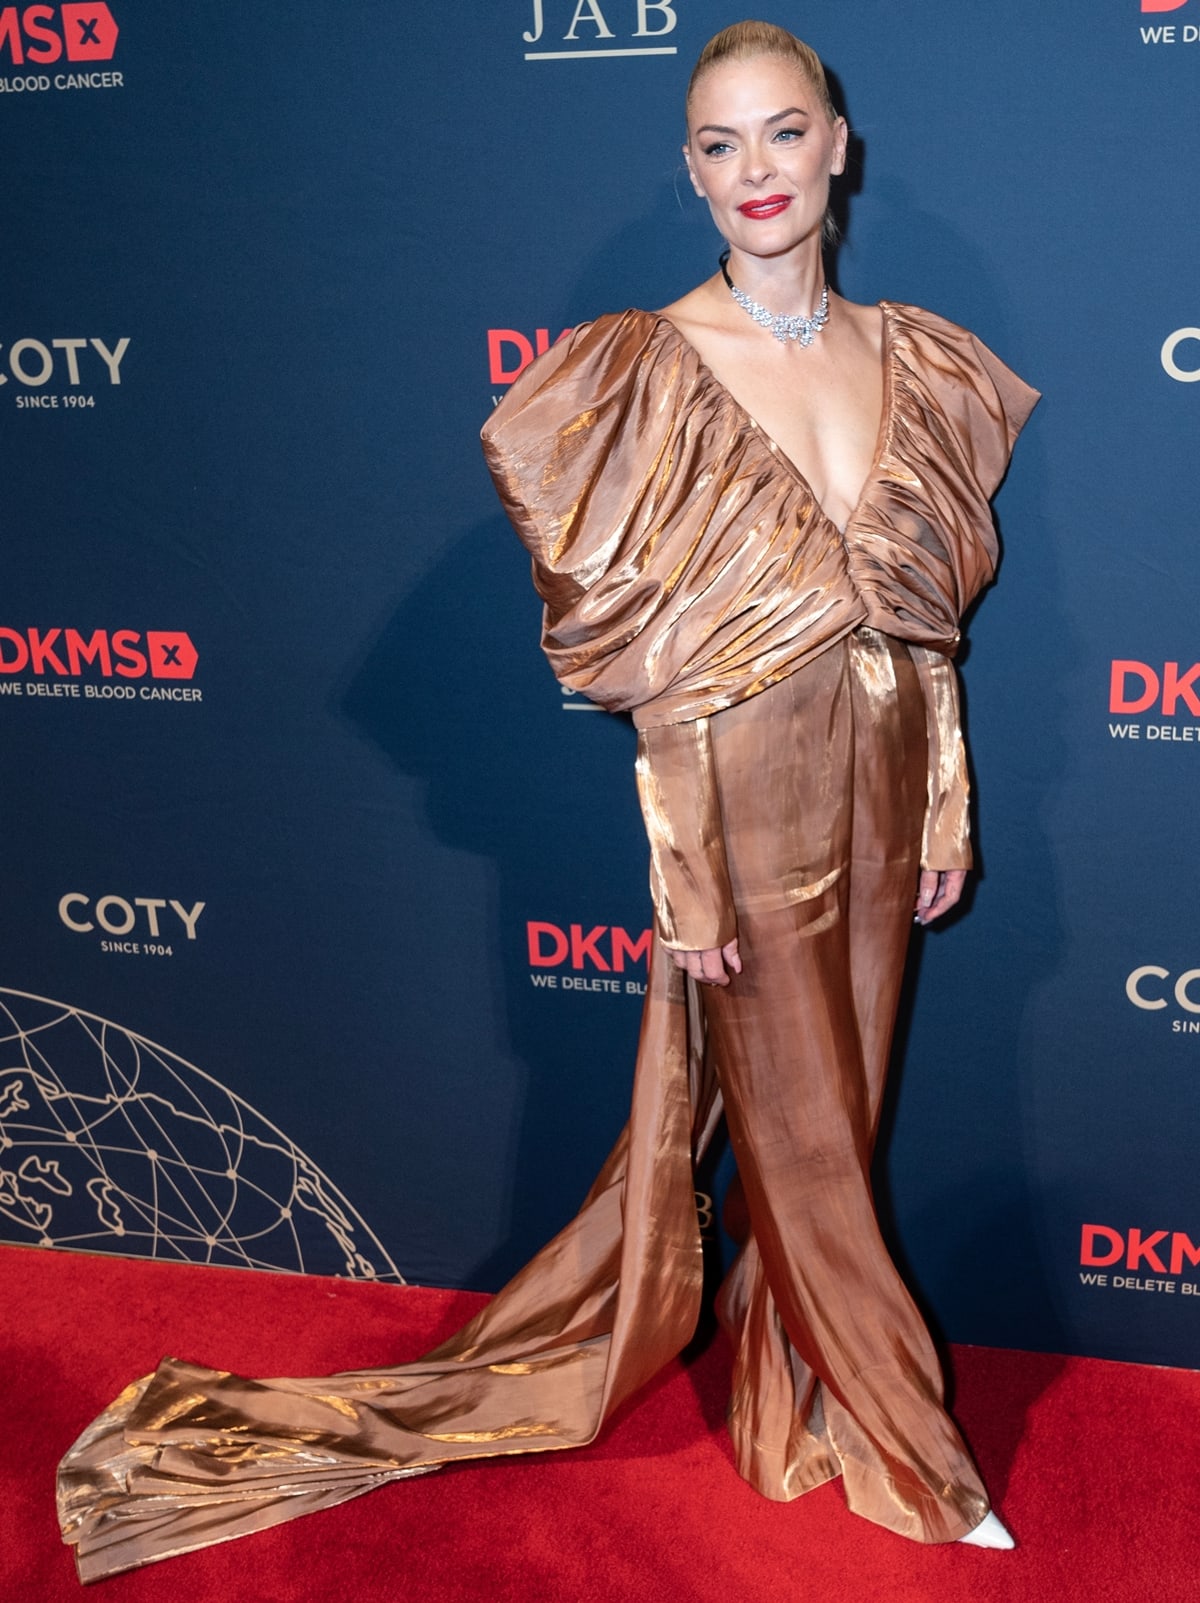 At the 2022 DKMS Gala in New York City on October 20, Jaime King, standing at 5 feet 8 inches (172.7 cm), dazzled in a gold Jovana Louis jumpsuit with exaggerated sleeves and a lustrous train, complemented by a diamond necklace with a black chain and a solid white leather clutch